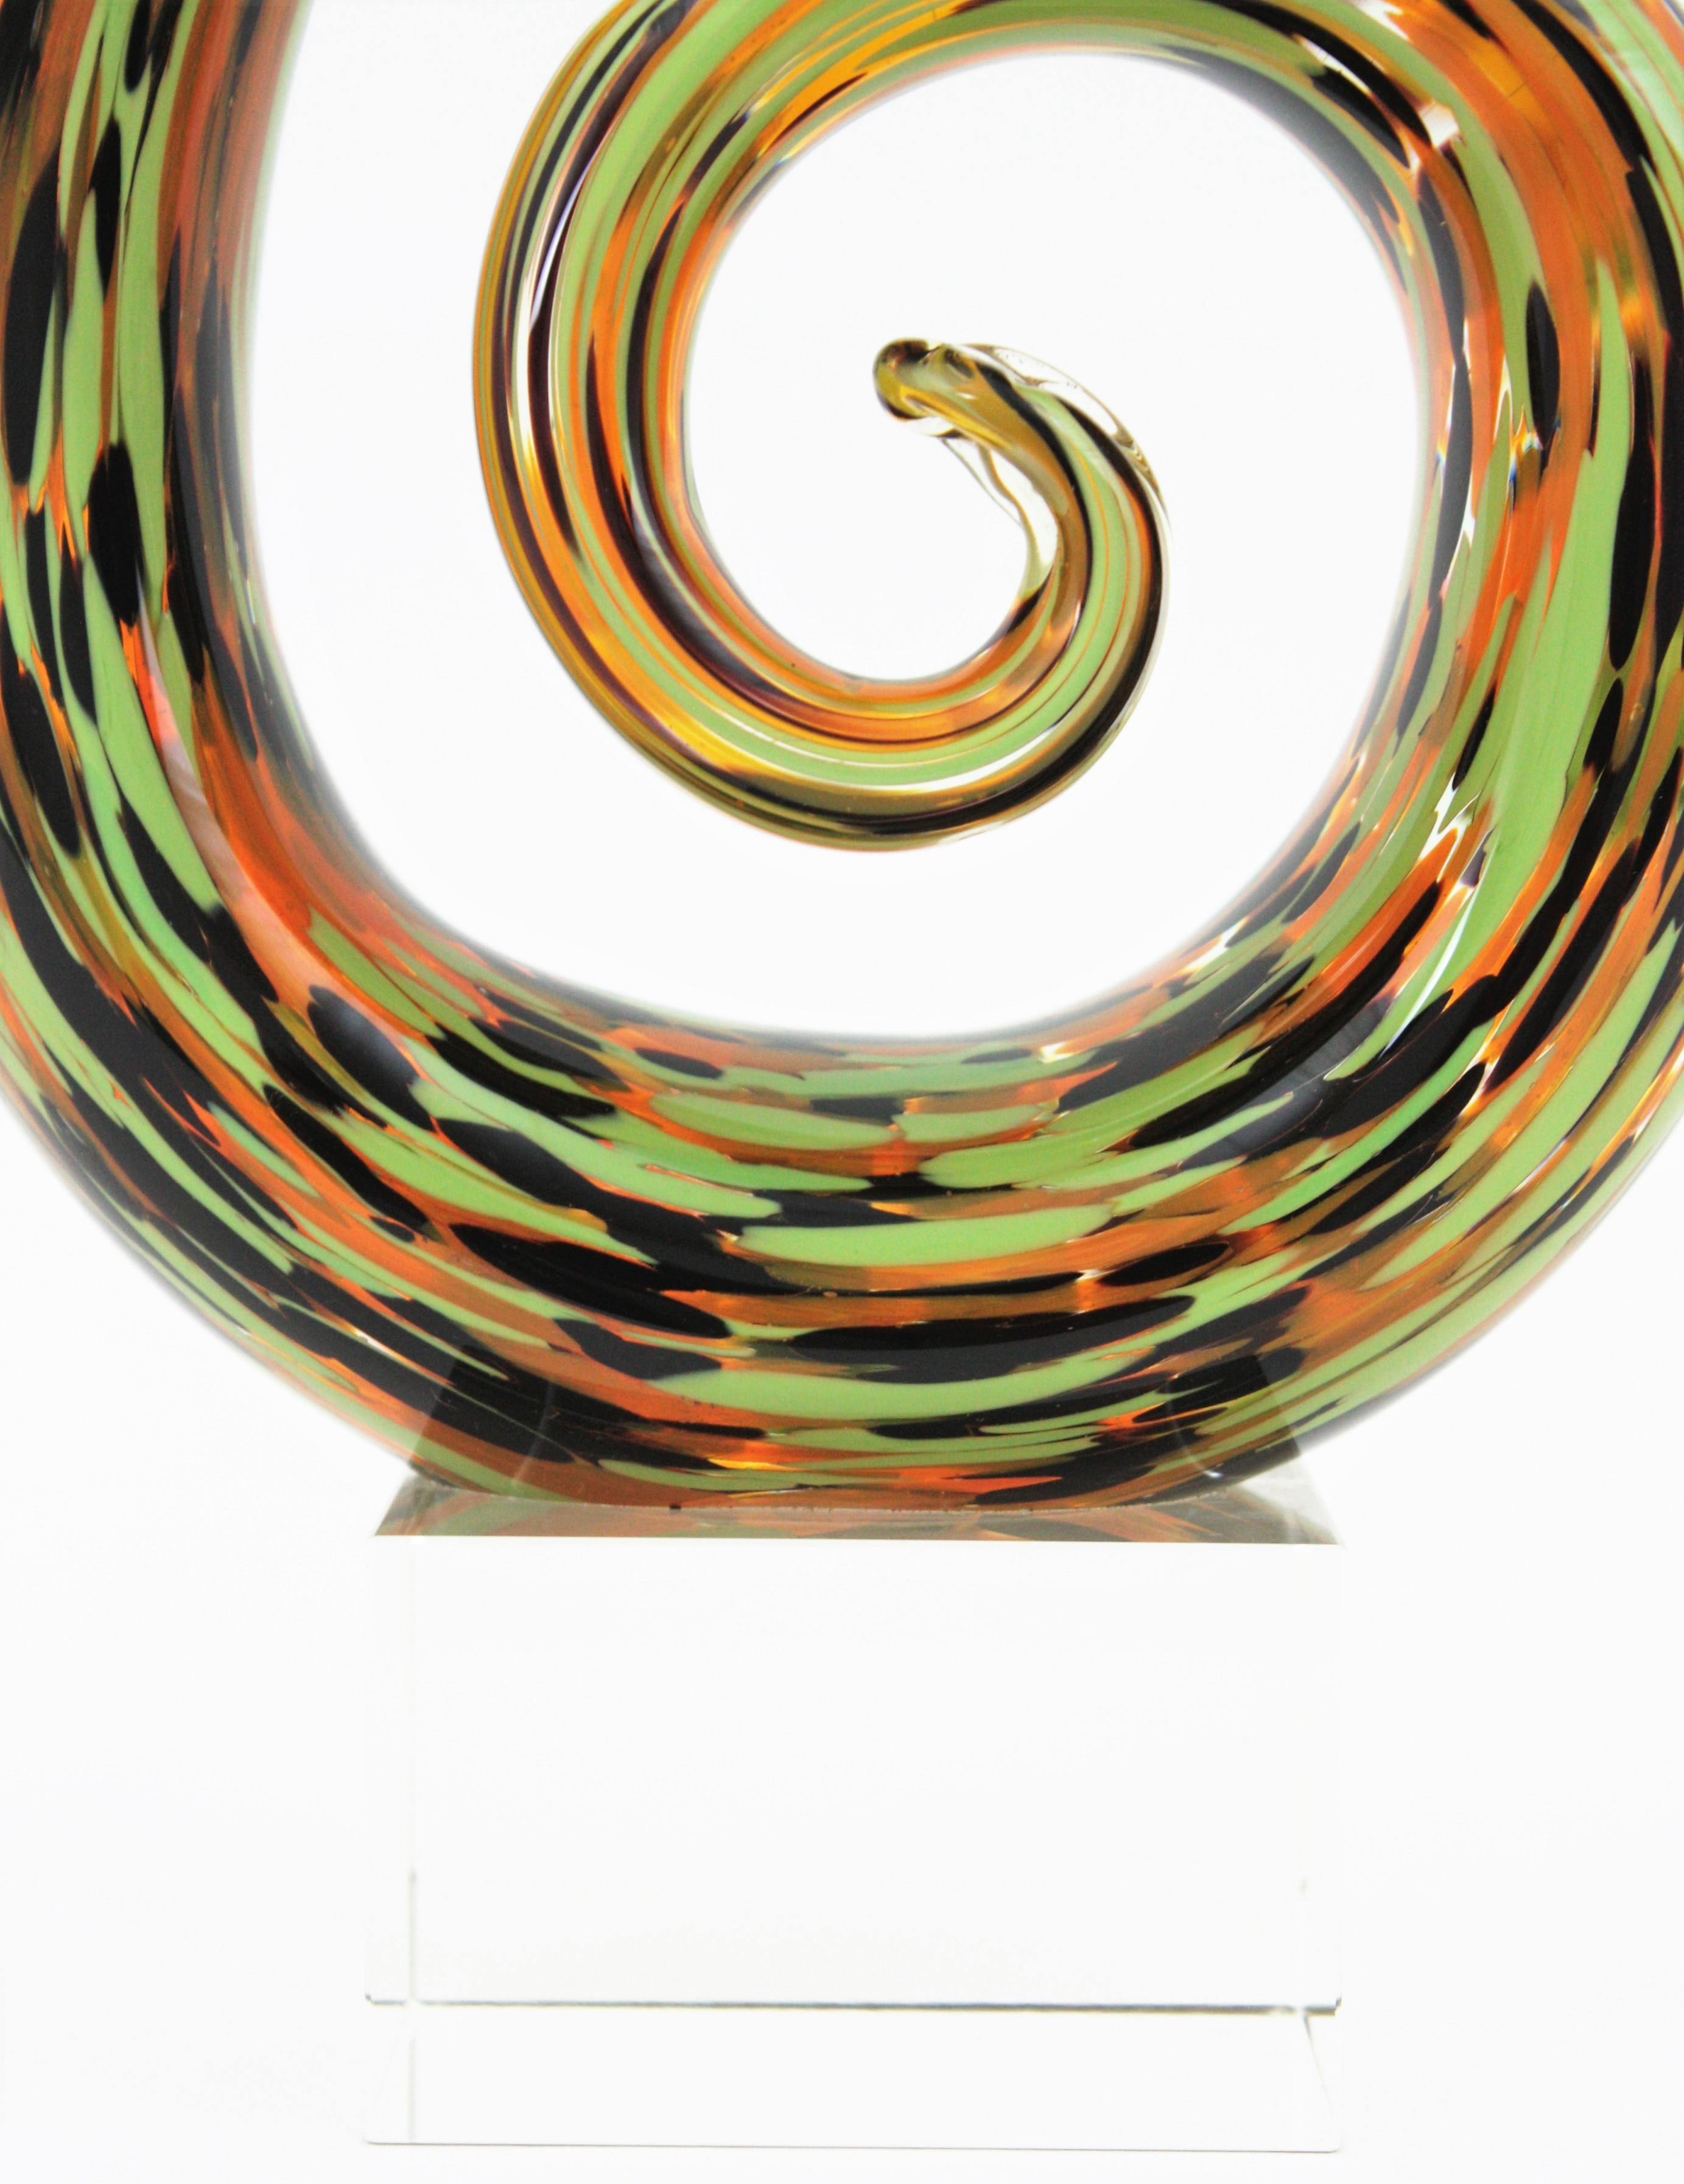 Murano Art Glass Multi Color Spiral Paperweight Sculpture, Italy, 1960s For Sale 2